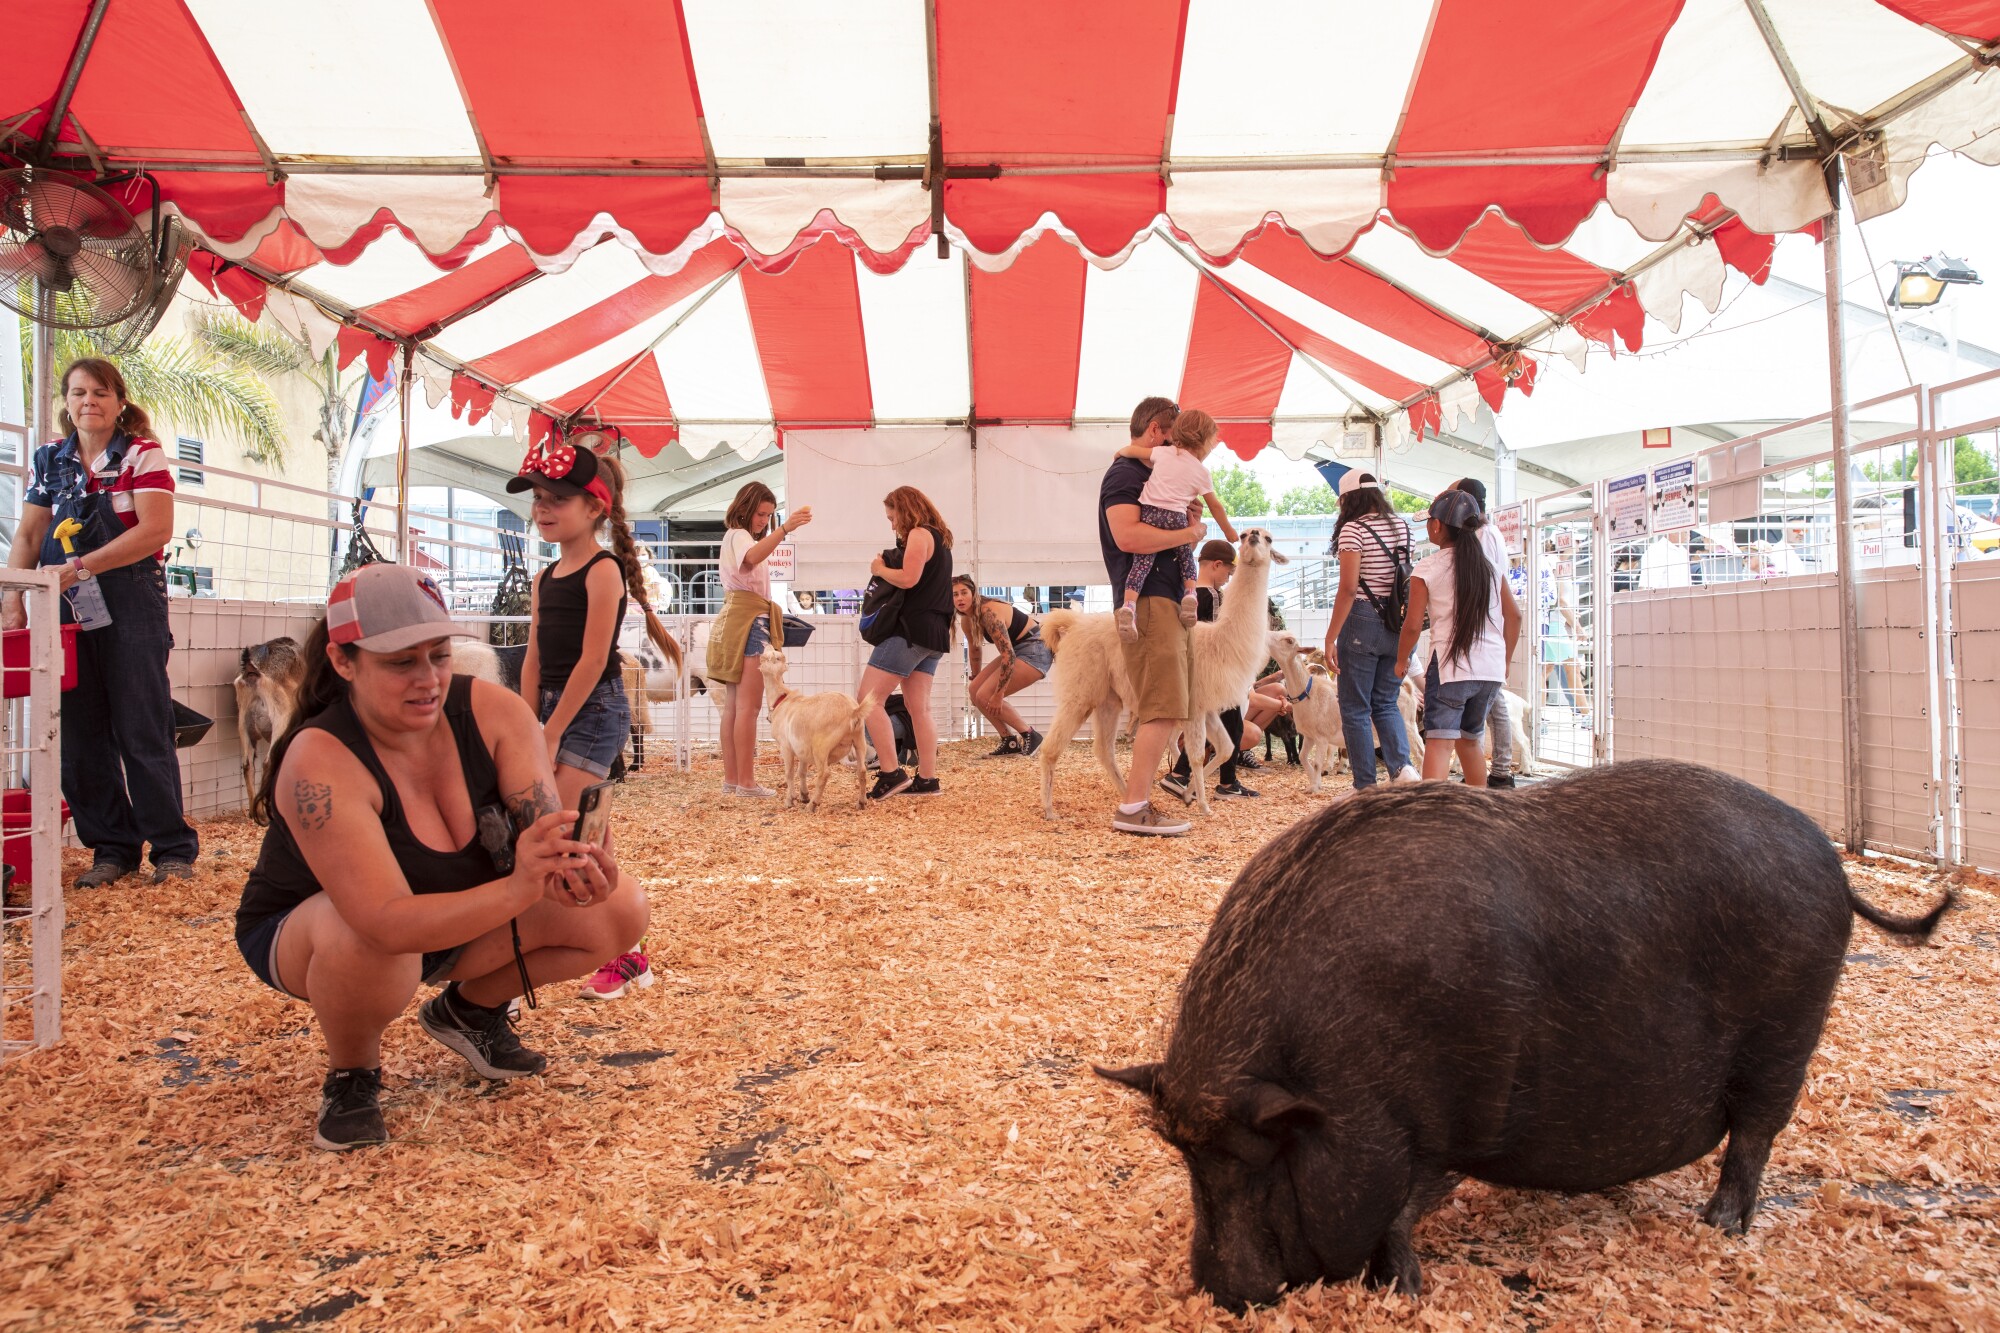 People enjoy a petting zoo at the San Diego County Fair on Wednesday, June 15, 2022 in Del Mar, California.